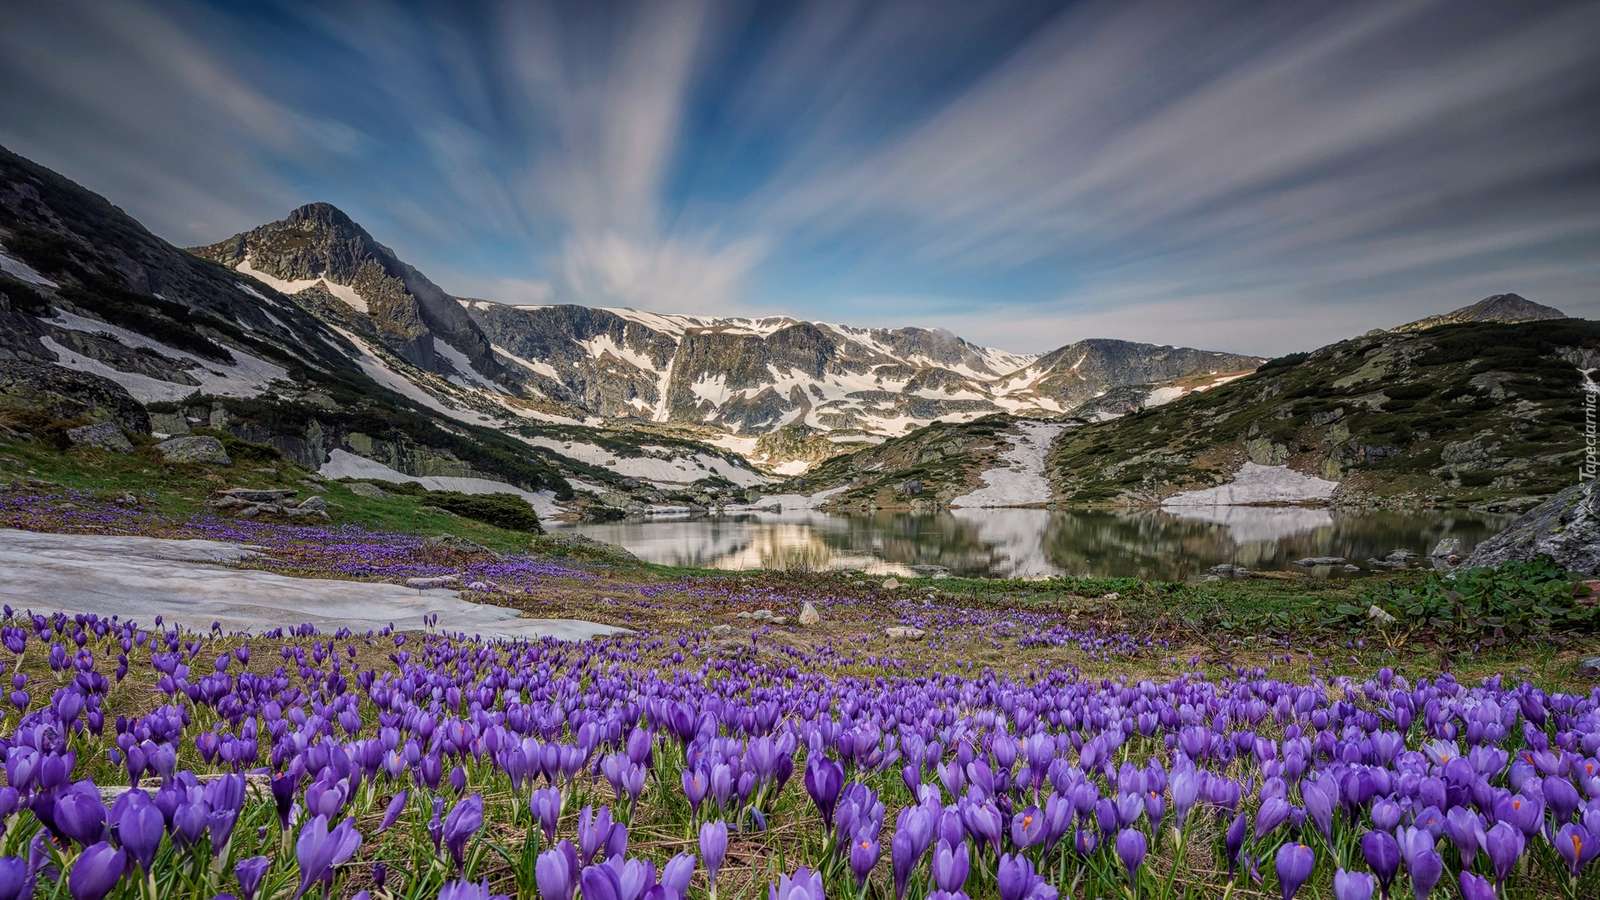 Crocuses over a mountain lake online puzzle